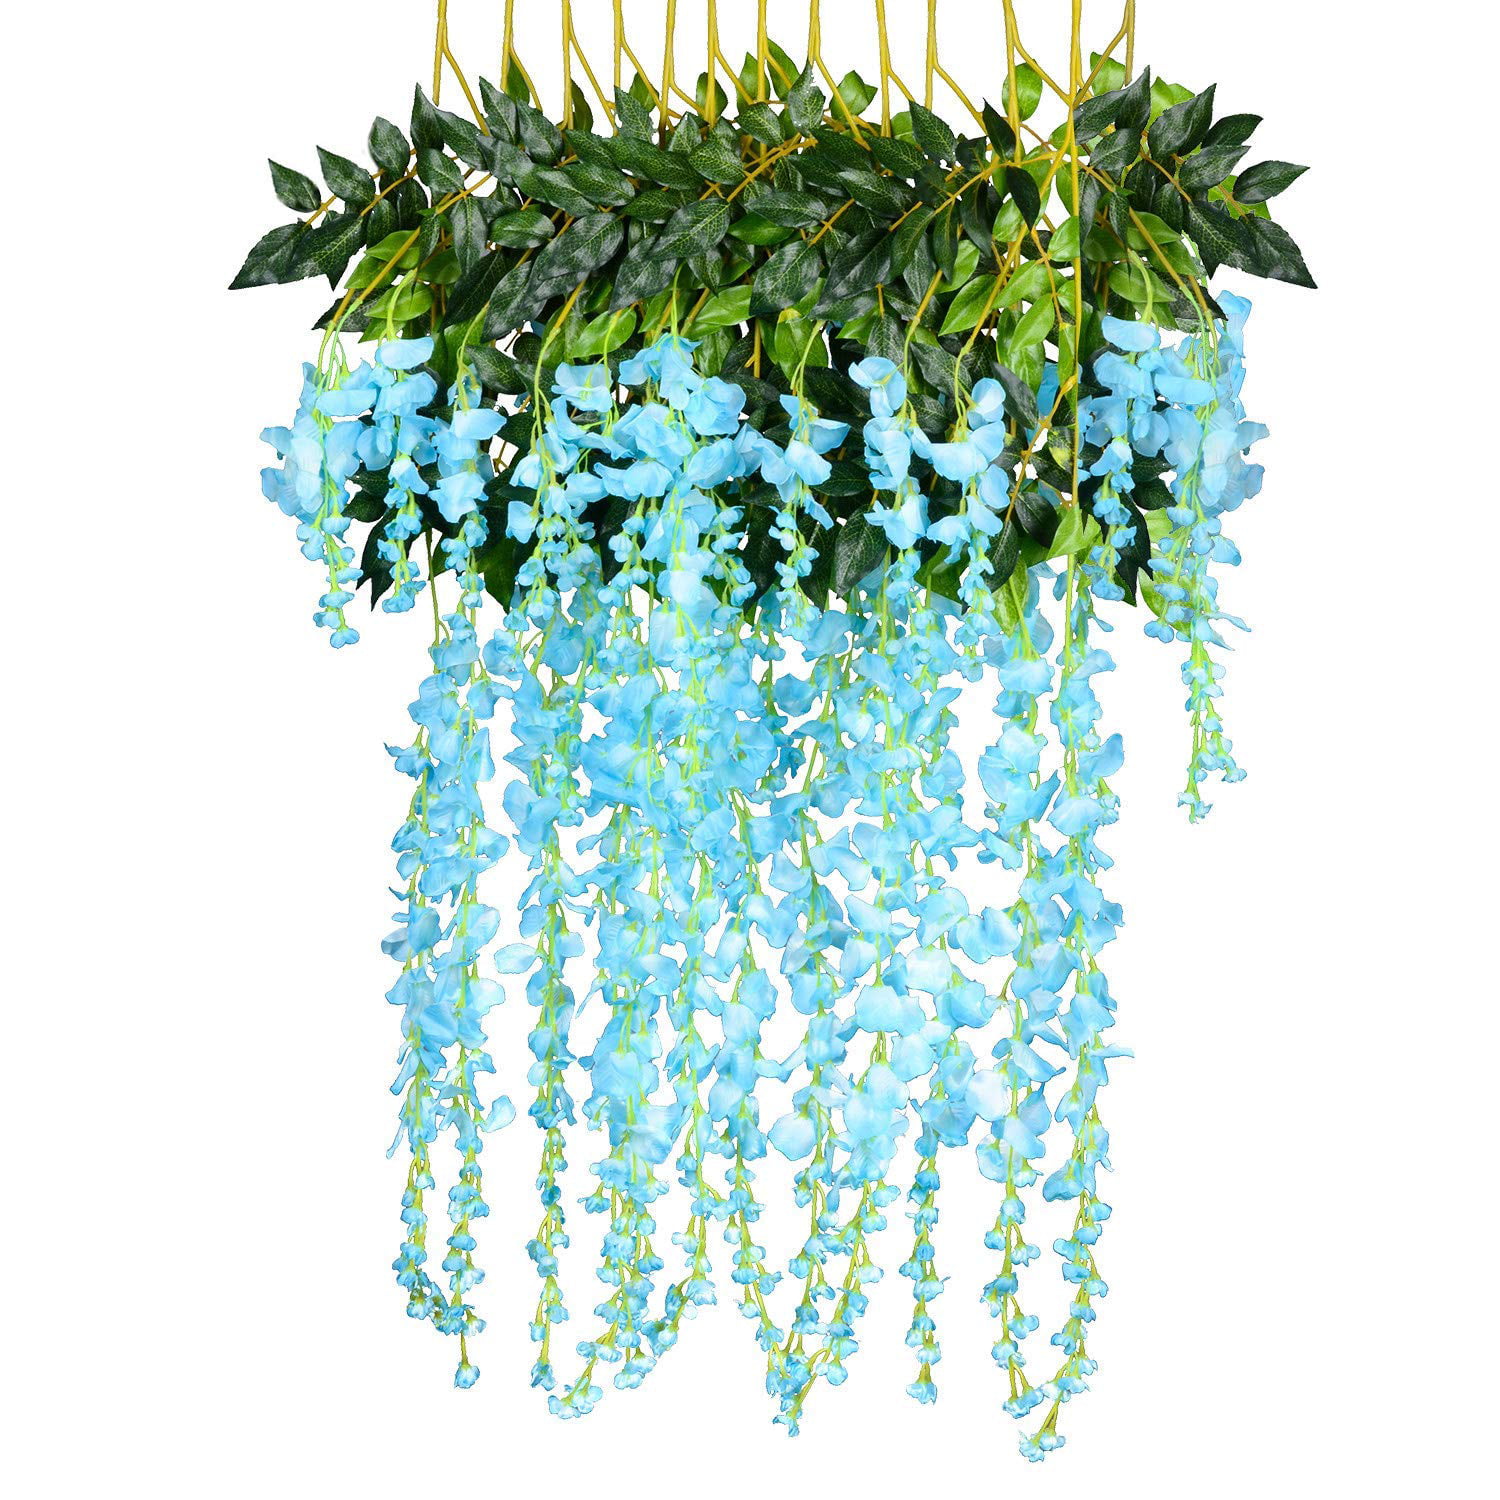 YSBER 6 Piece /12 Piece 3.6 Feet Artificial Fake Wisteria Vine Rattan Yard and Wedding ArtificialVines_Green12PC03 12PCS, Green Hanging Silk Flowers String for Home Party